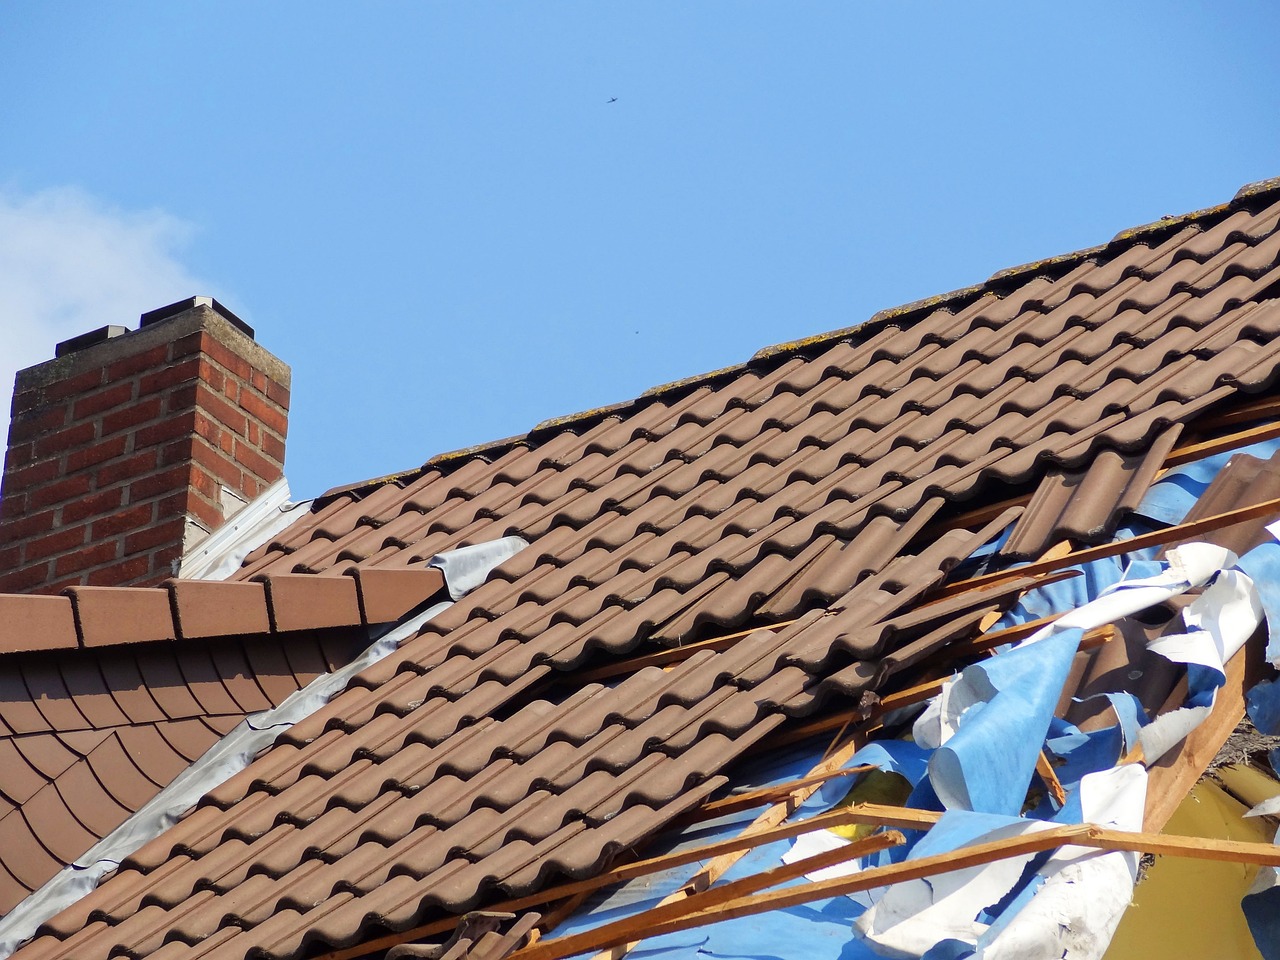 Image of a damaged roof, representing the risks and consequences of improper property insurance coverage.